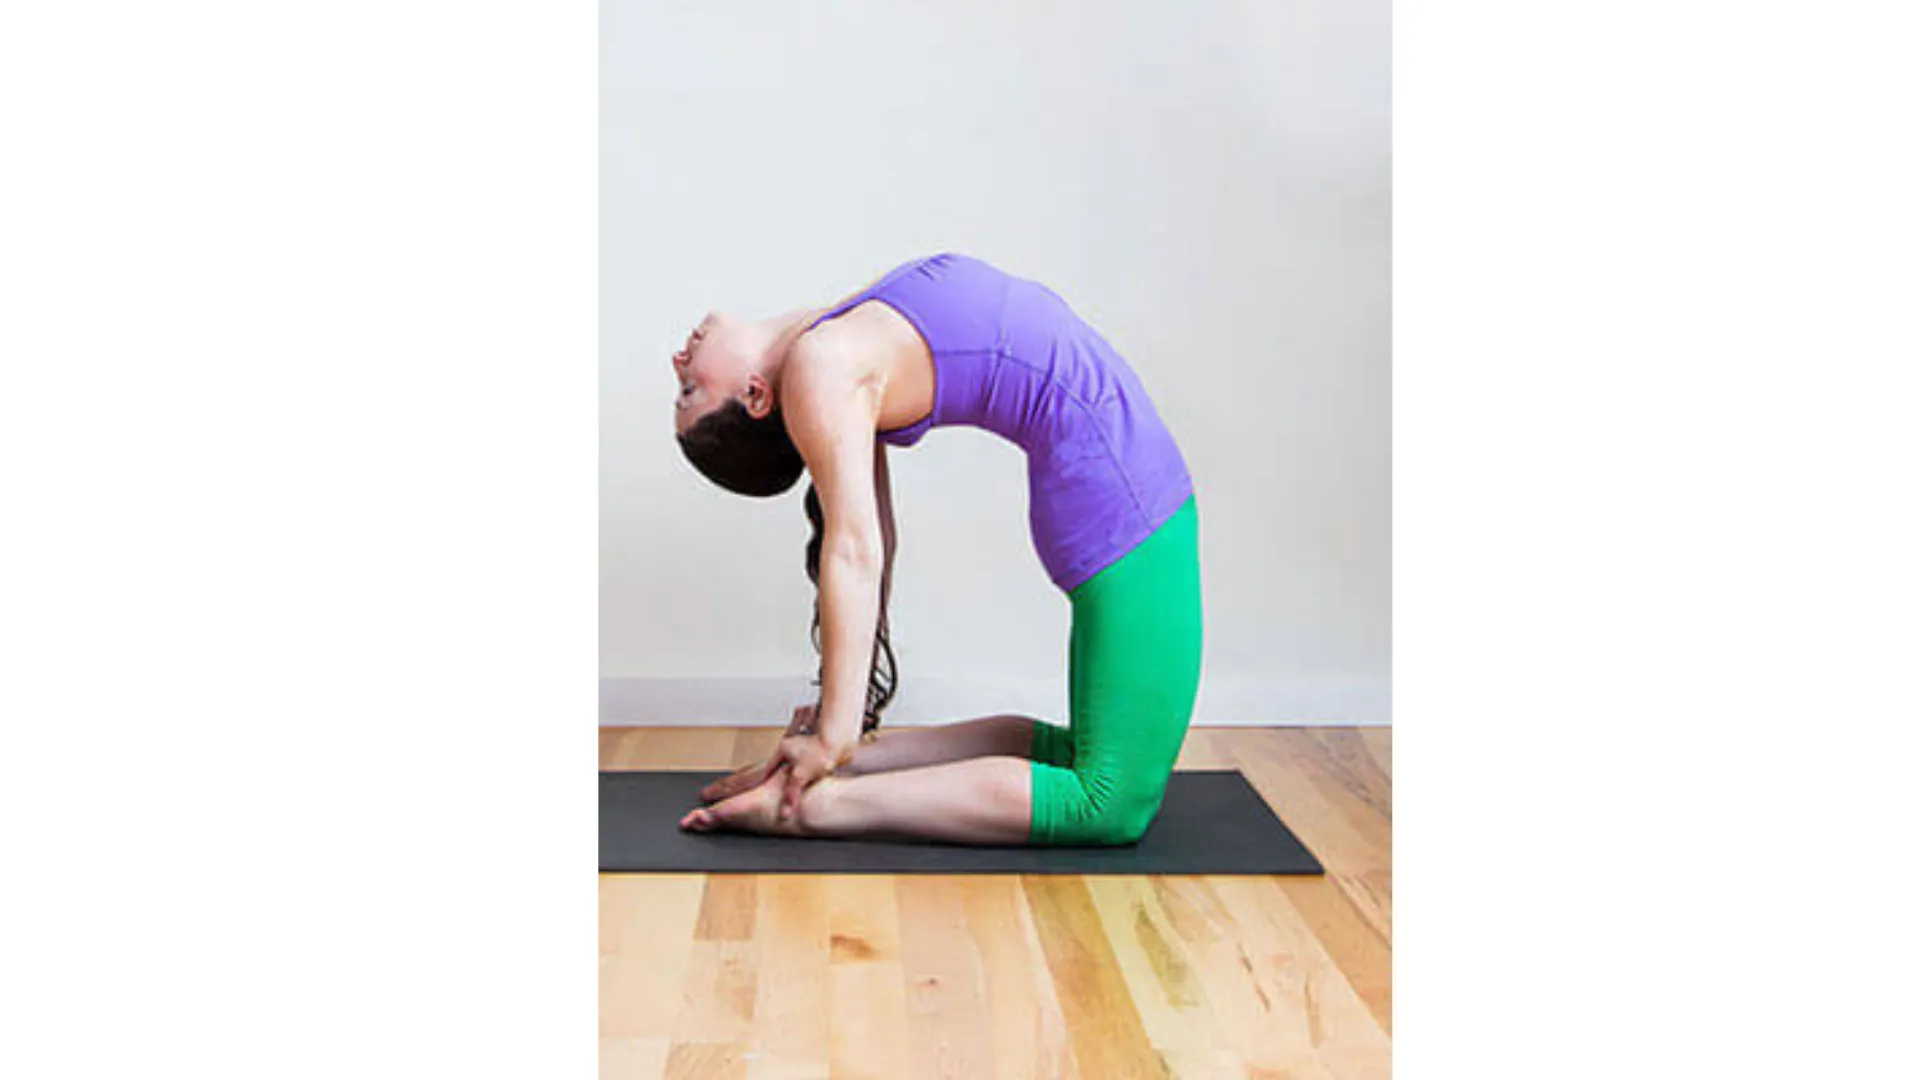 What are the best yoga poses to reduce belly fat fast? Can you share  picture of that? - Quora